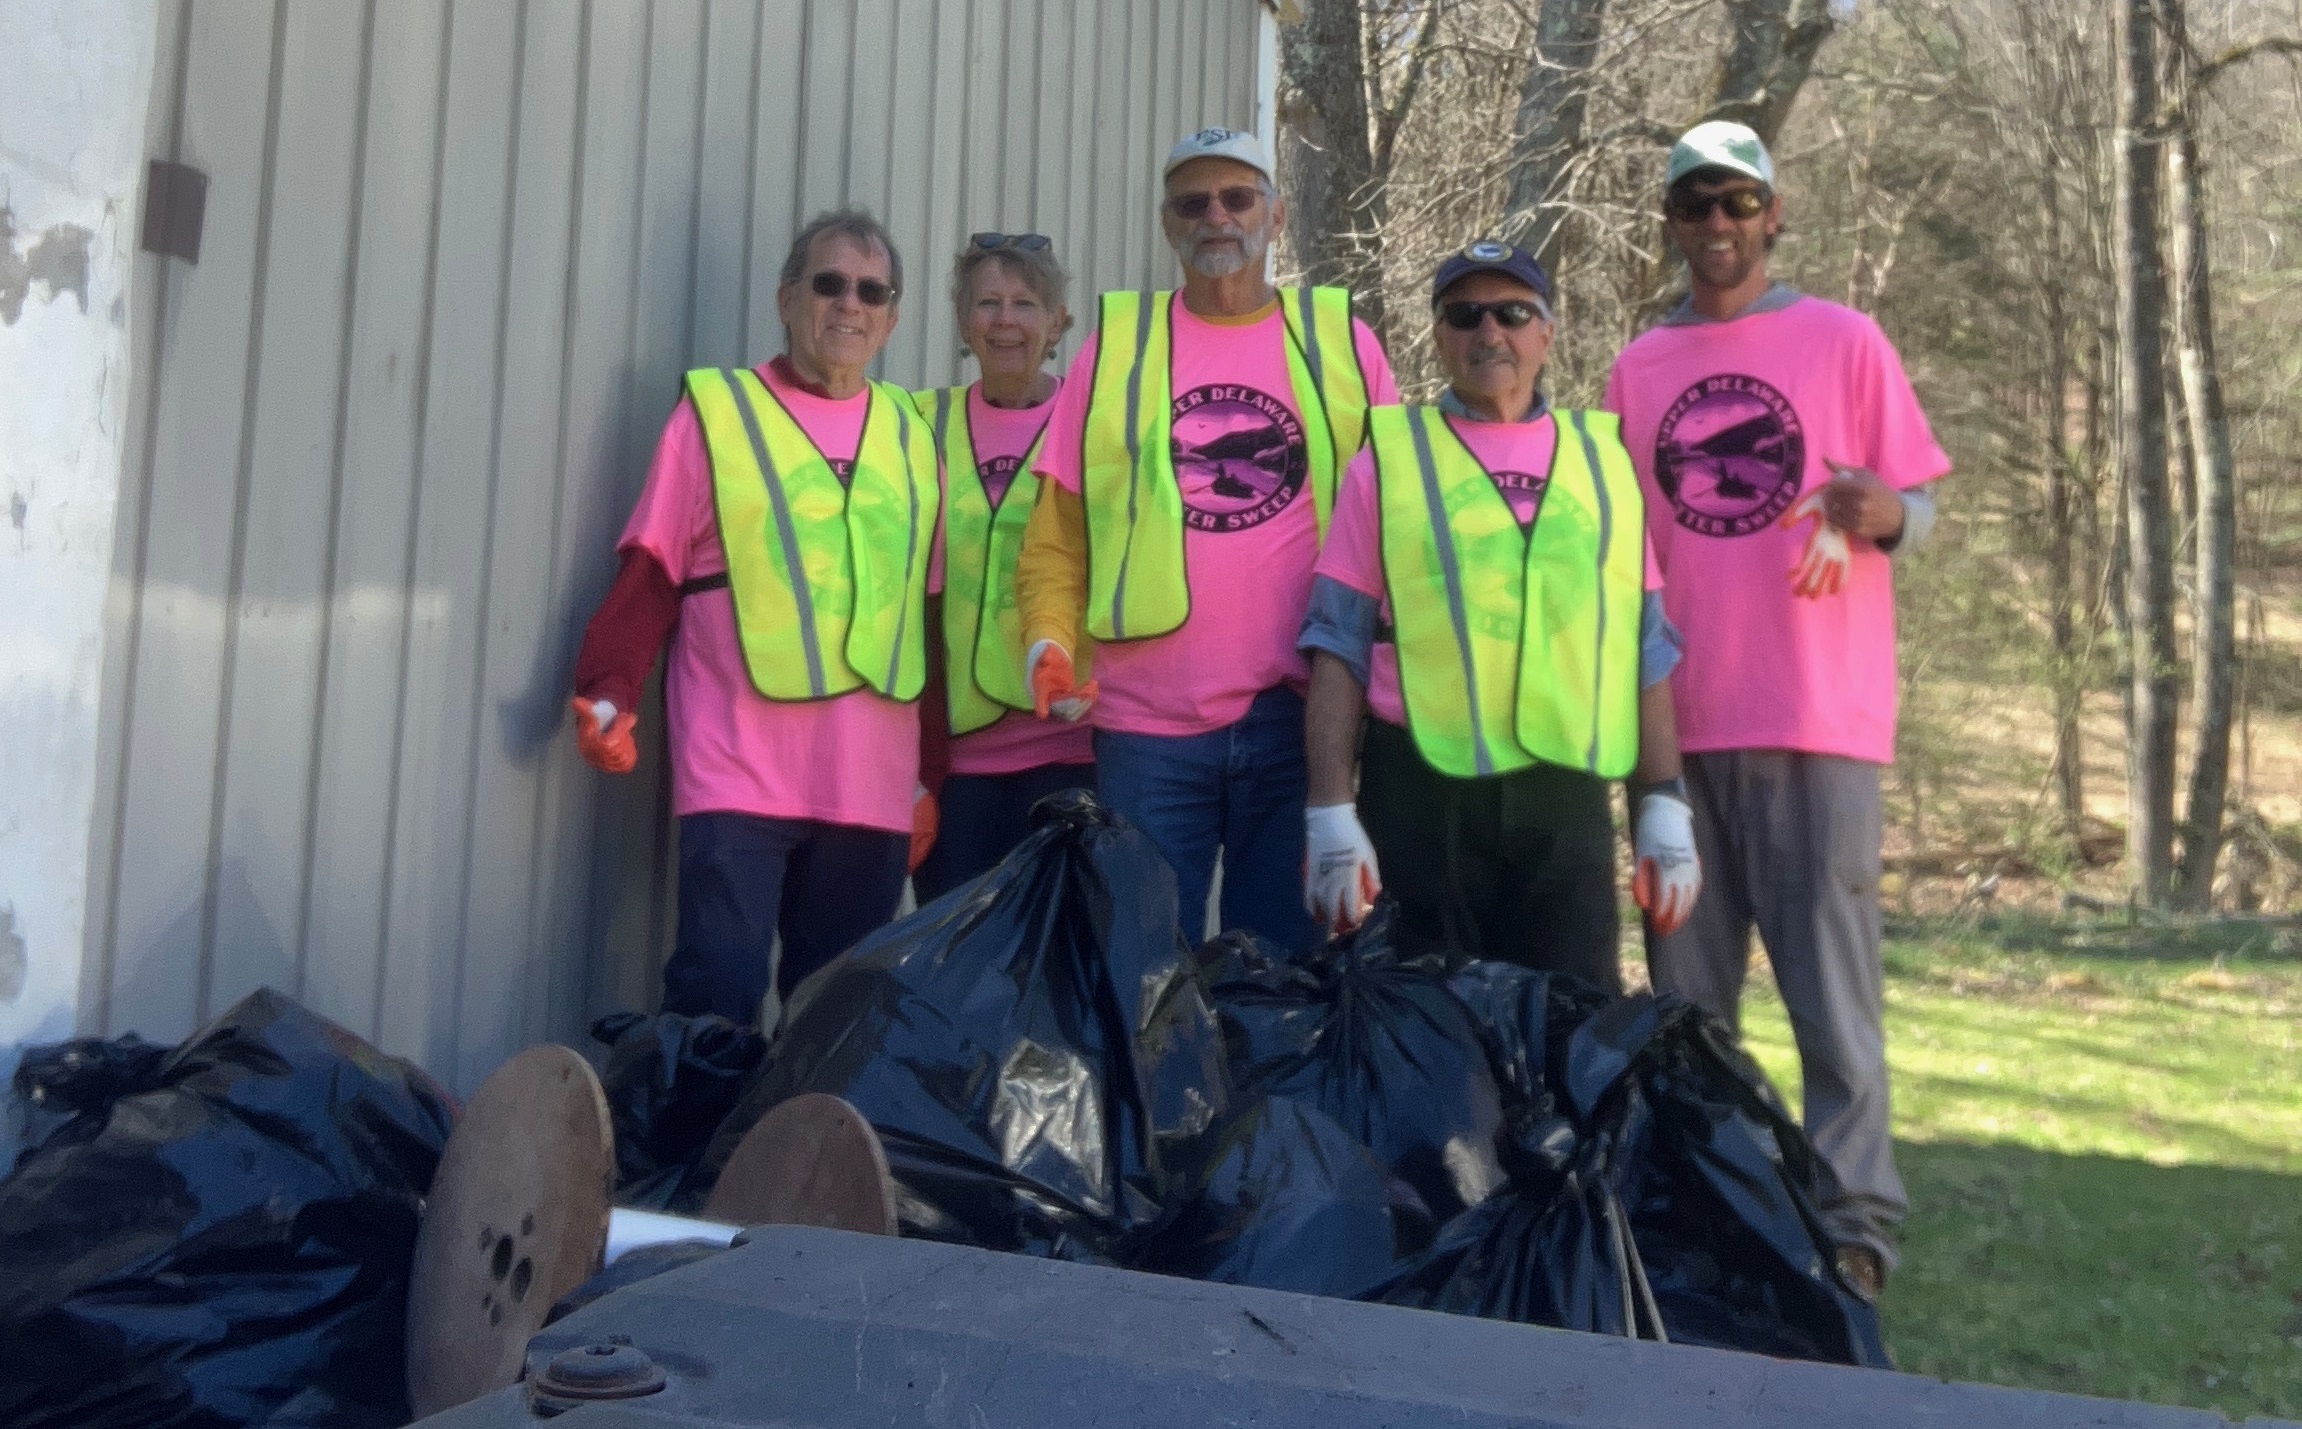 Milanville group after litter sweep